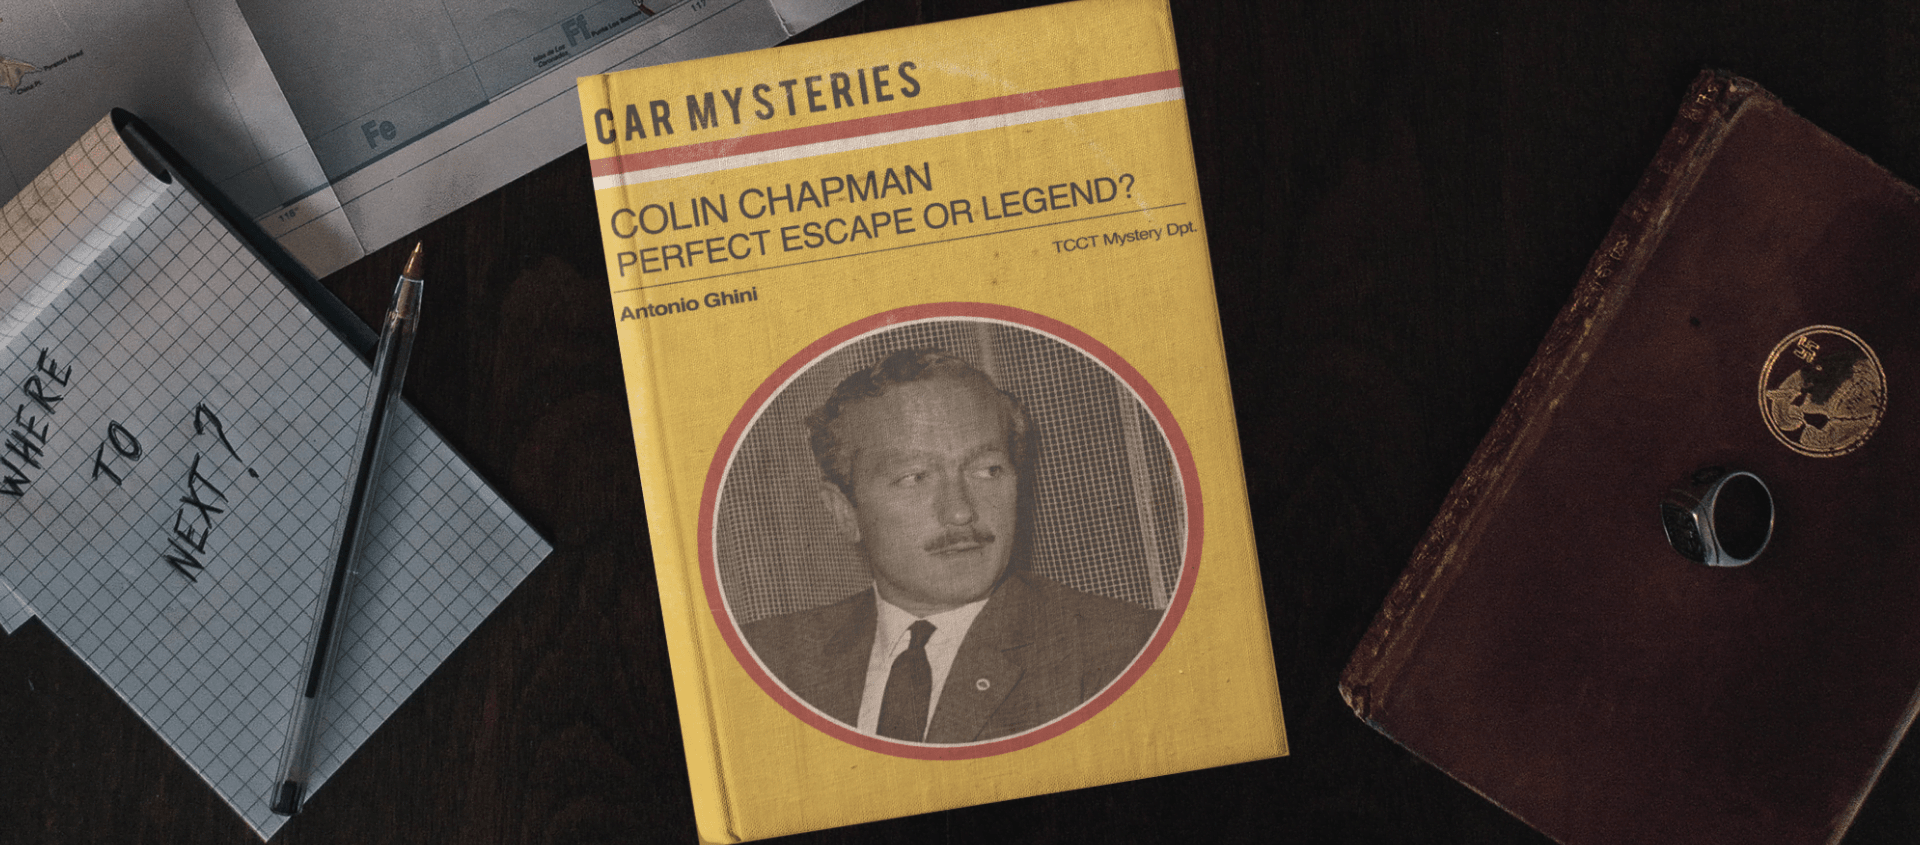 The mystery of Colin Chapman's death, the man who created the Lotus